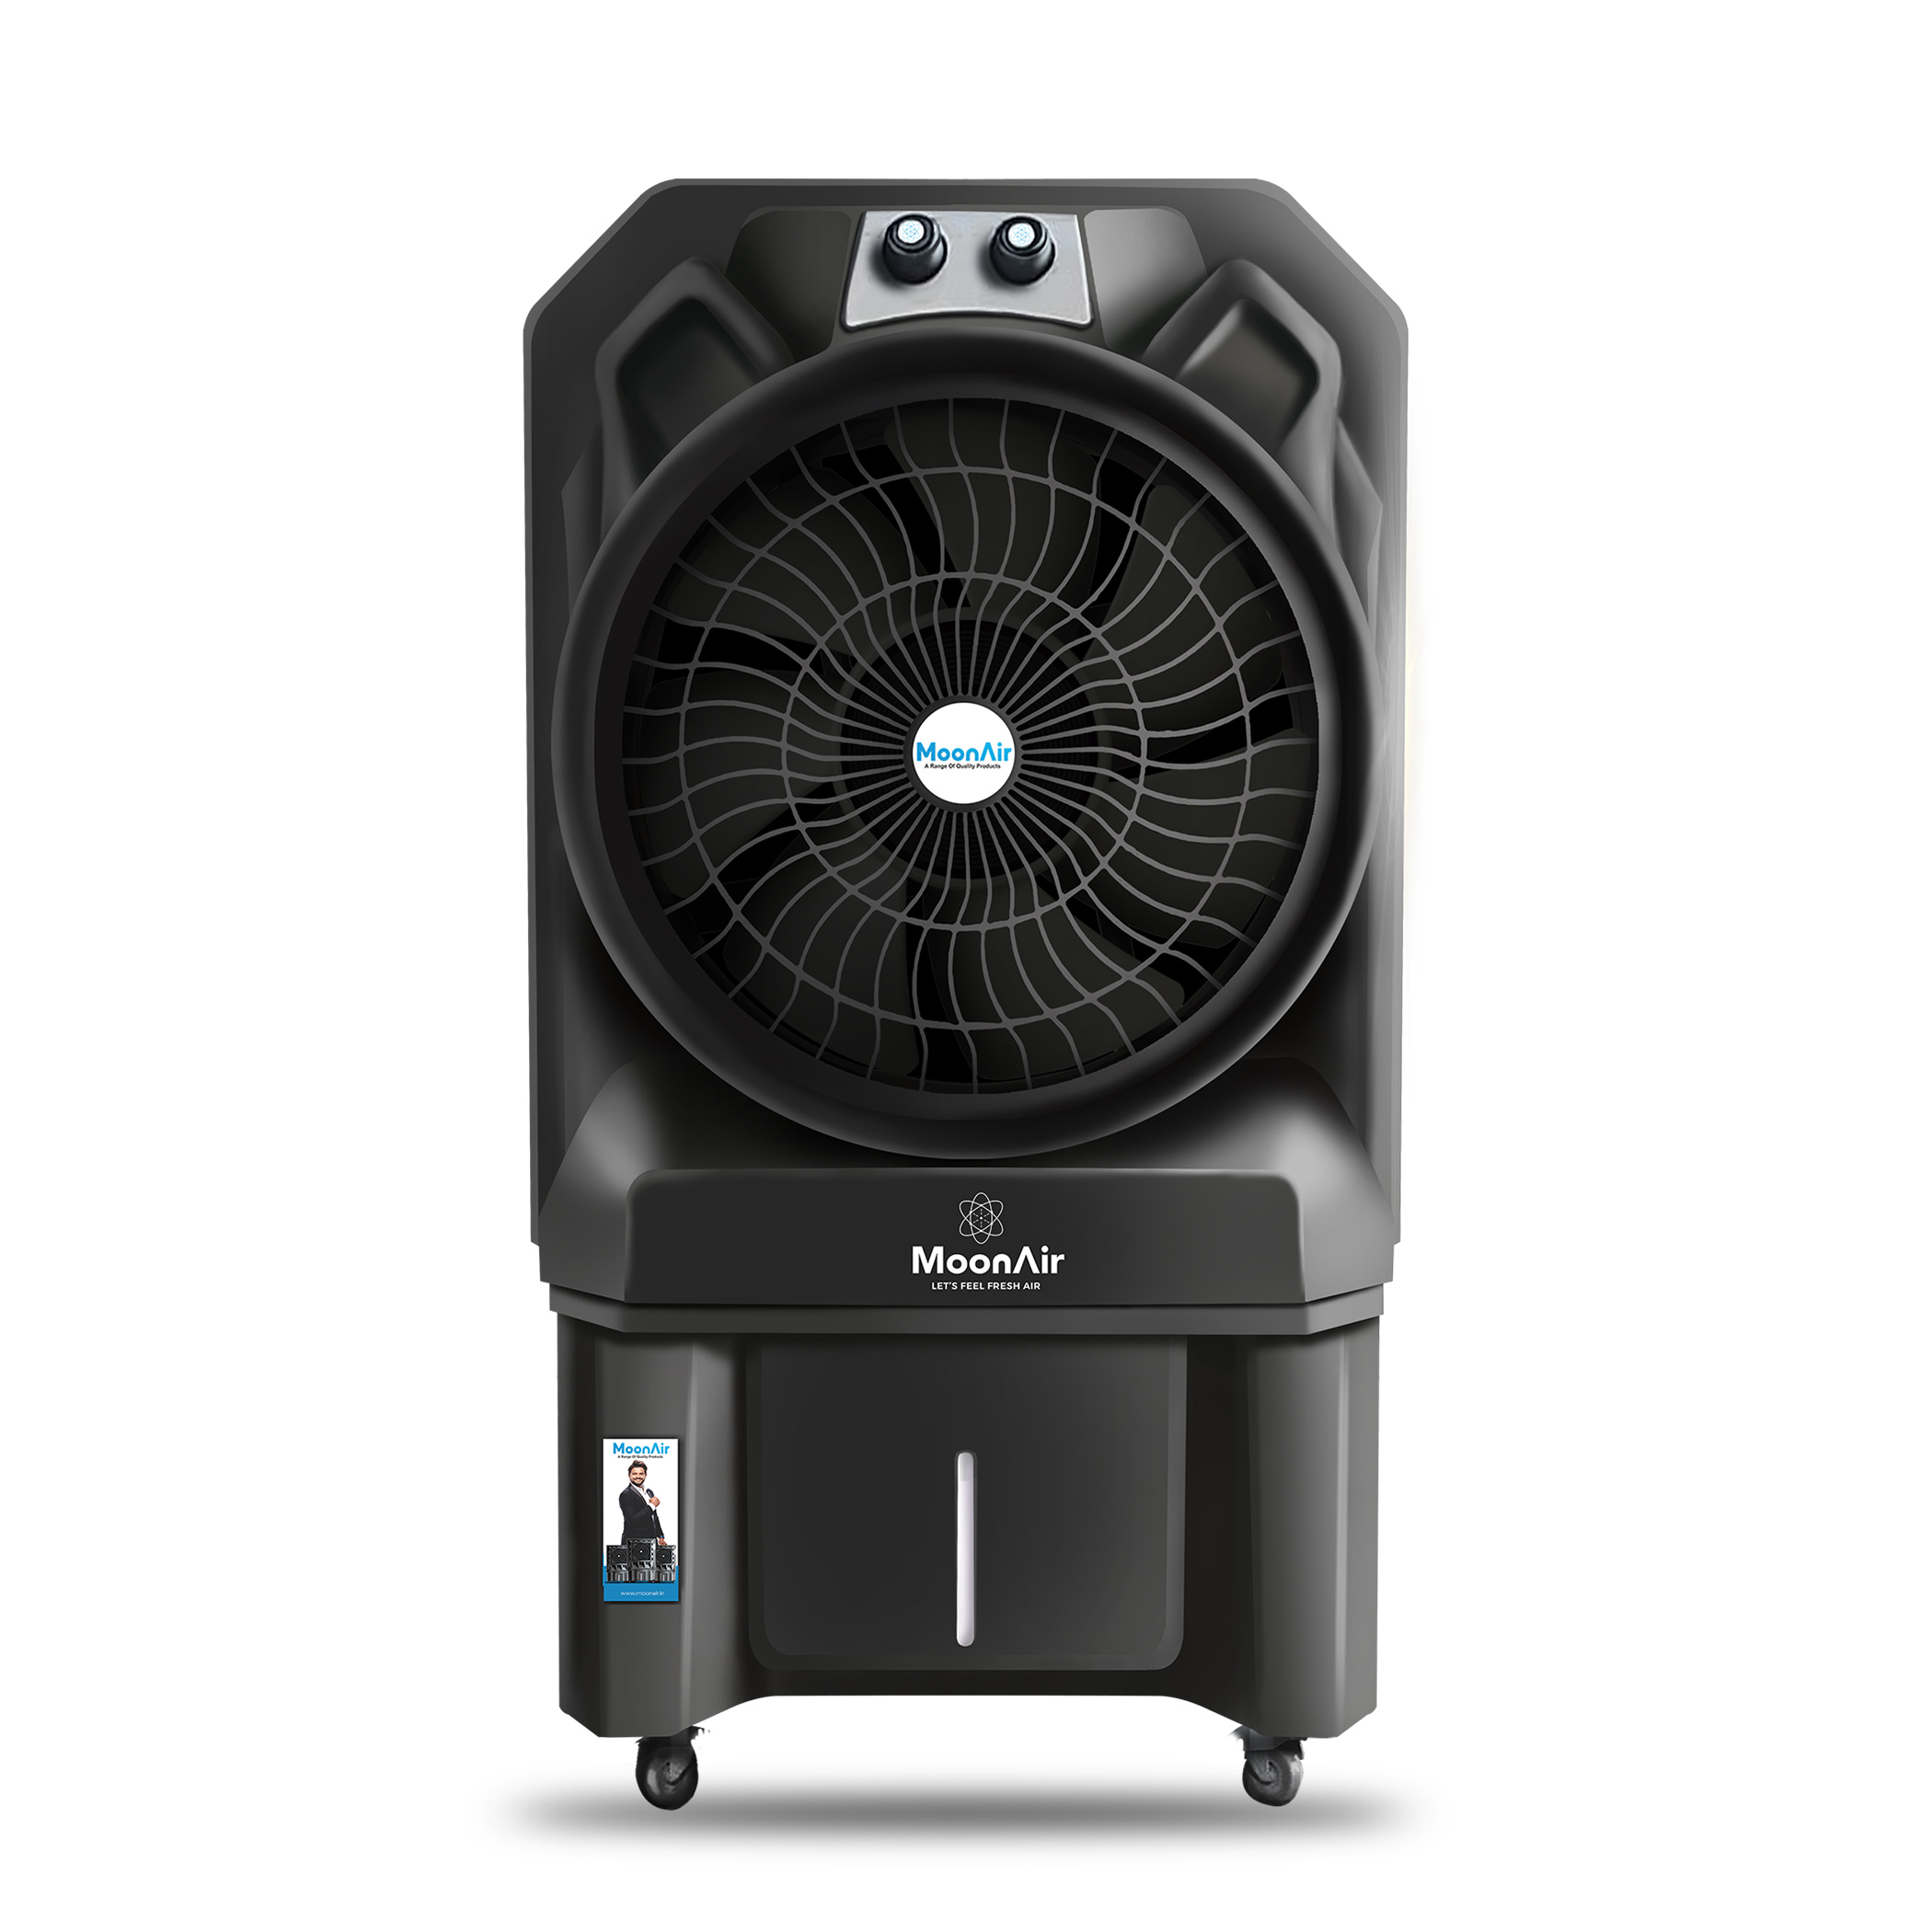 MoonAir Plastic Cyclone 105 L Commercial Cooler For Home, Hi-efficiency For Powerful With Auto Swing, 4-Way Air Deflection and Powerful Air Throw With High-Density Honeycomb pads, Air Cooler, Commercial Cooler, Commercial Air Cooler, Commercial Water Cooler; Premium Black